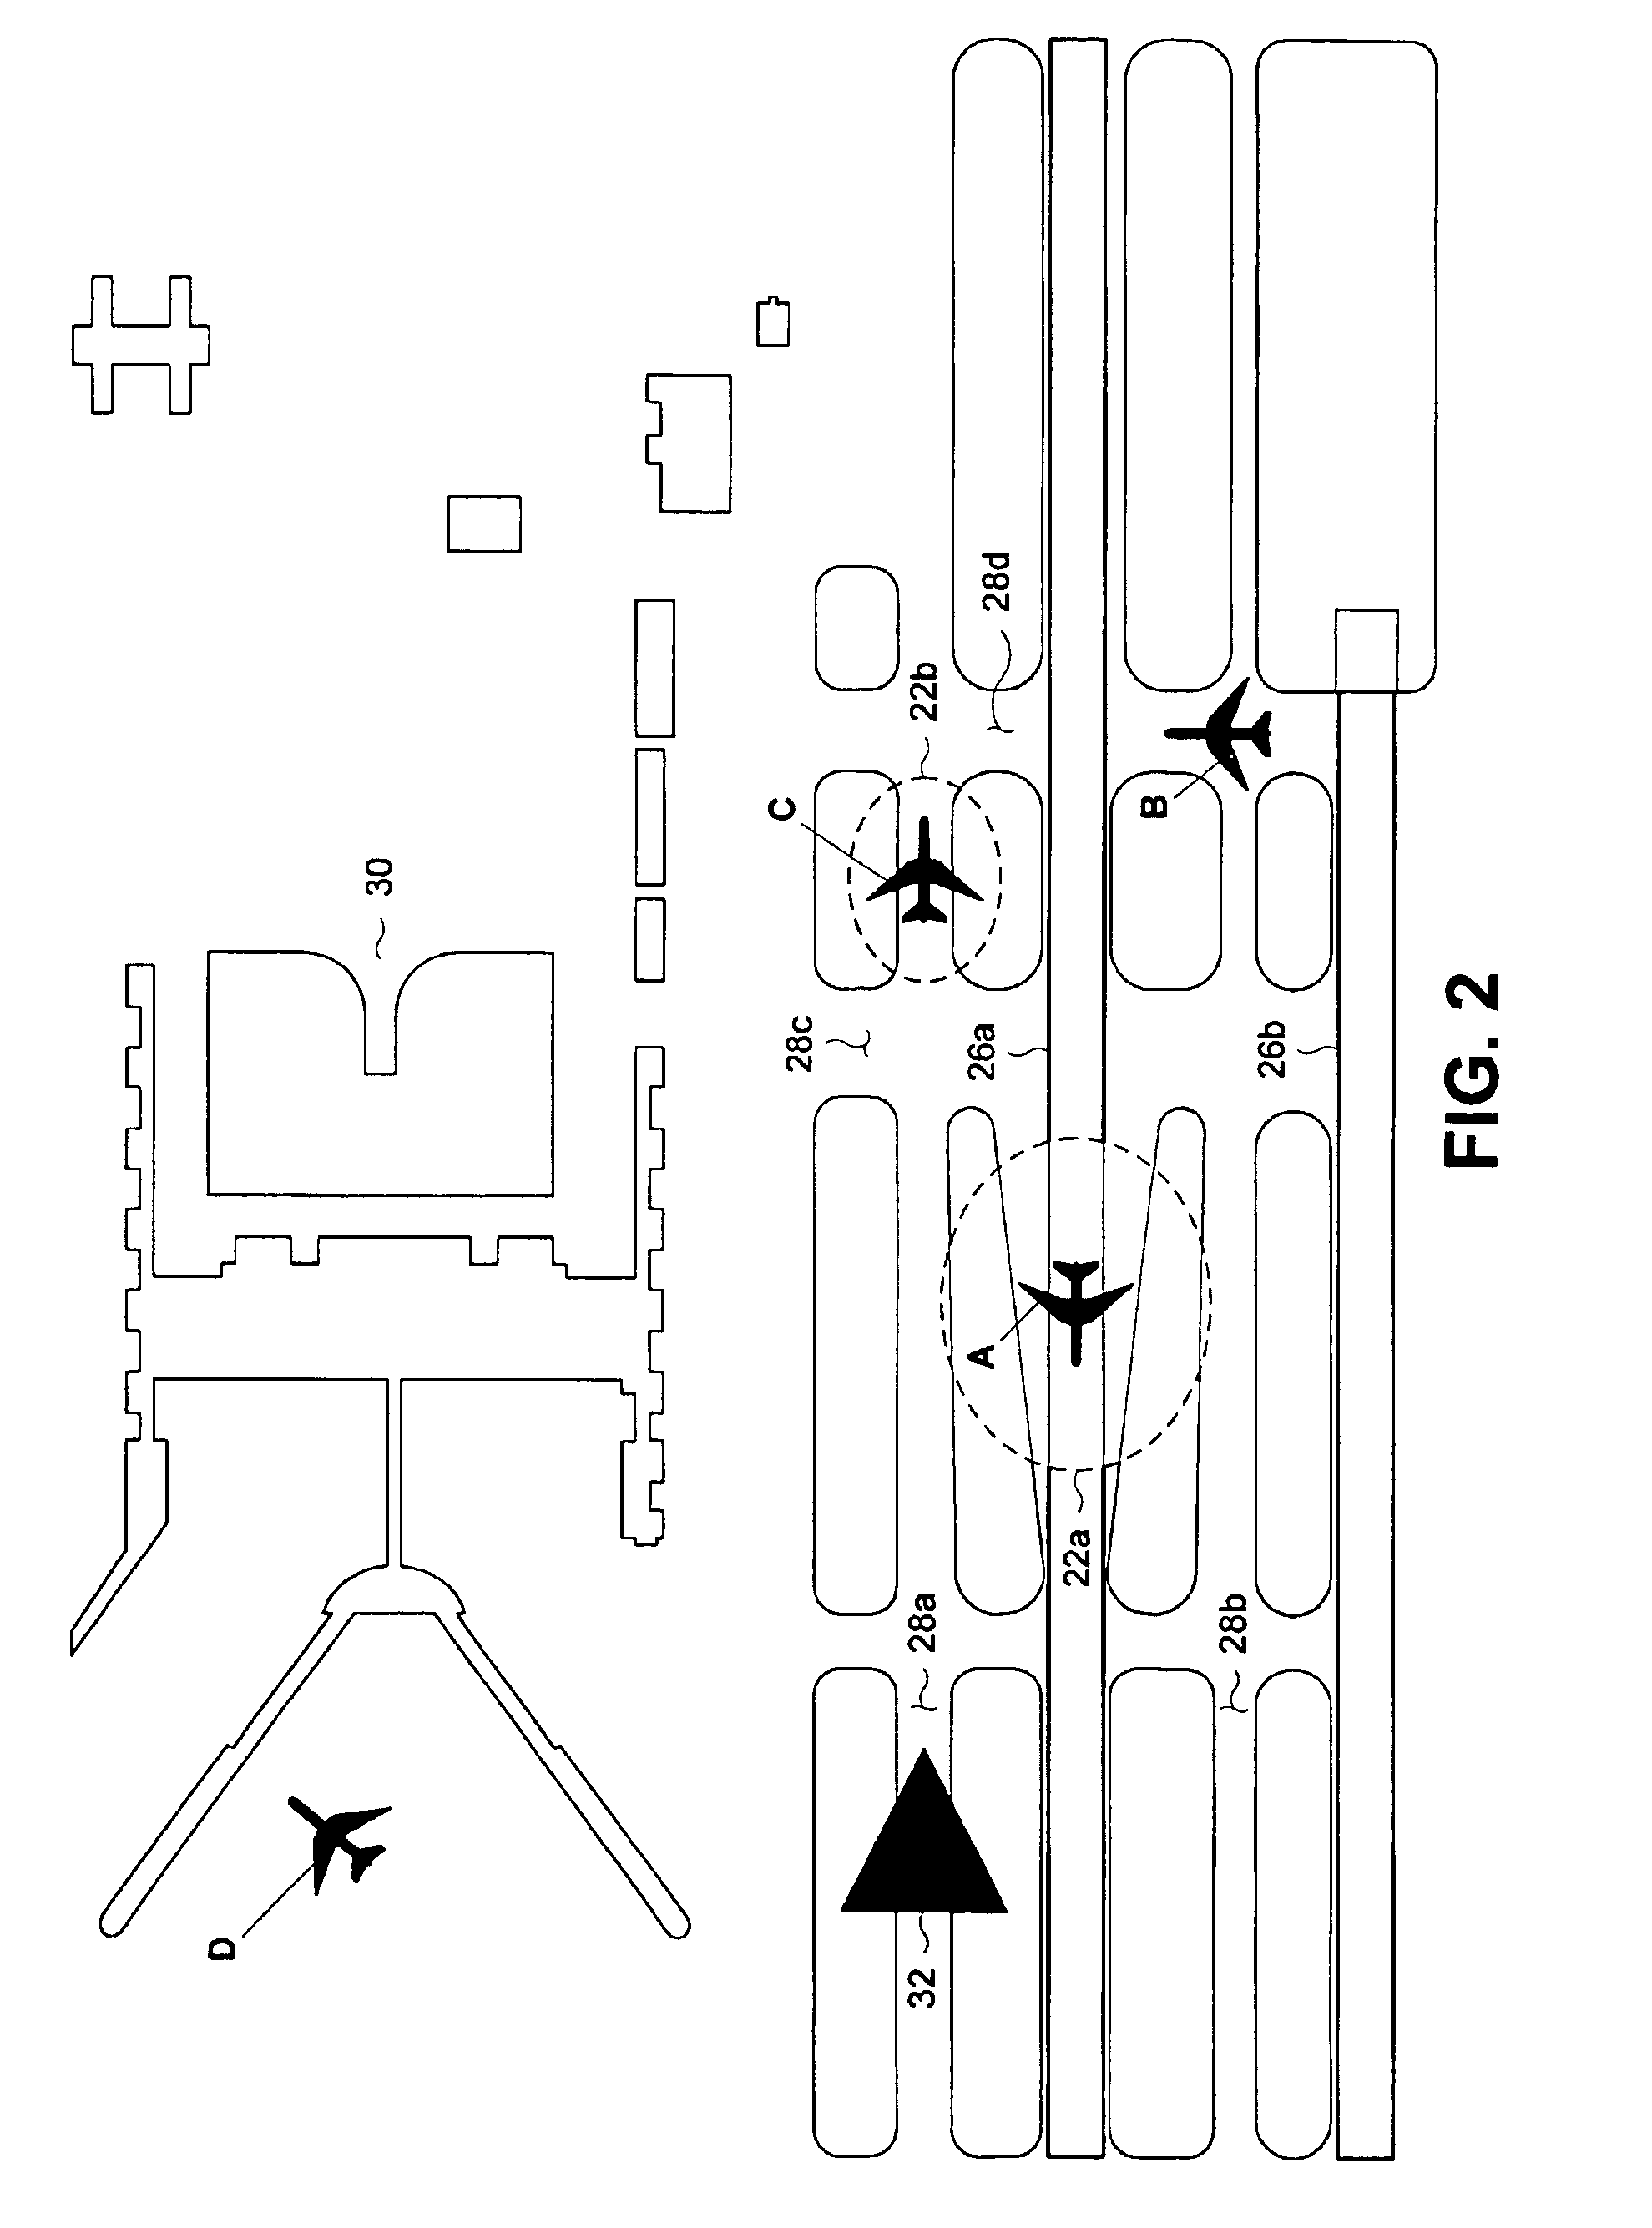 Graphical symbology for depicting traffic position, navigation uncertainty, and data quality on aircraft displays